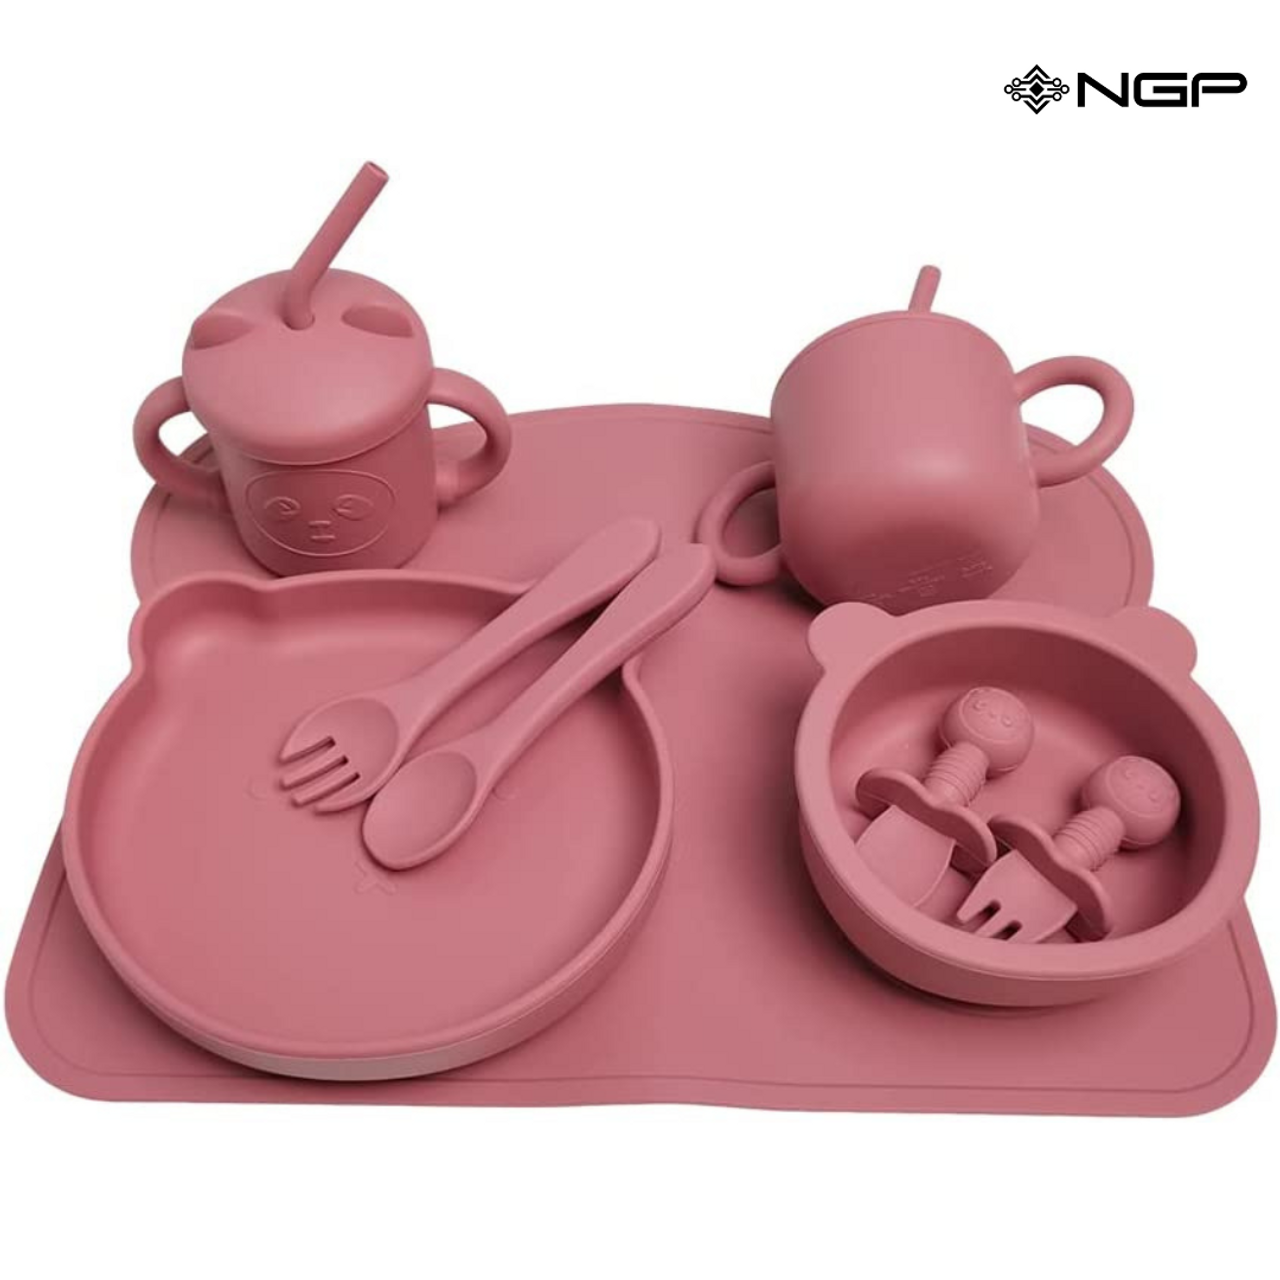 NGP Baby Silicone Feeding Set 11 Pcs Infant Dinnerware with Baby Plate for  Baby Silicone Bibs Spoons Fork Straw Sippy Cups Toddler Bowls Dishes Kids